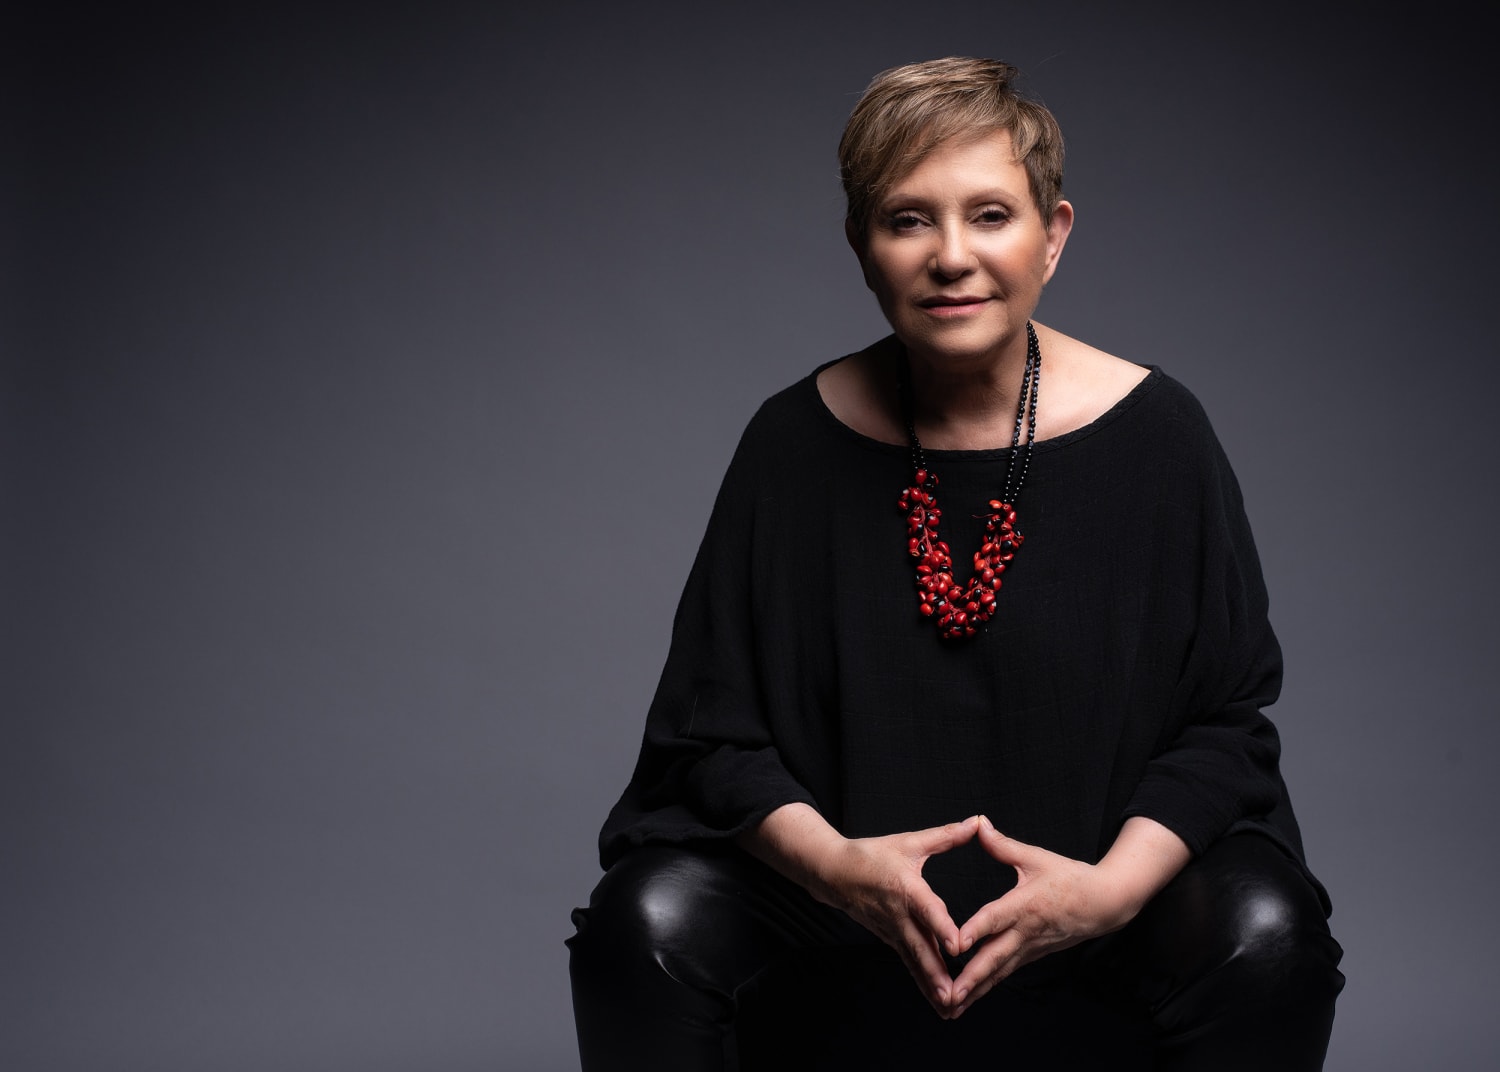 Adriana Barraza shares her hope for young Latino actors pic